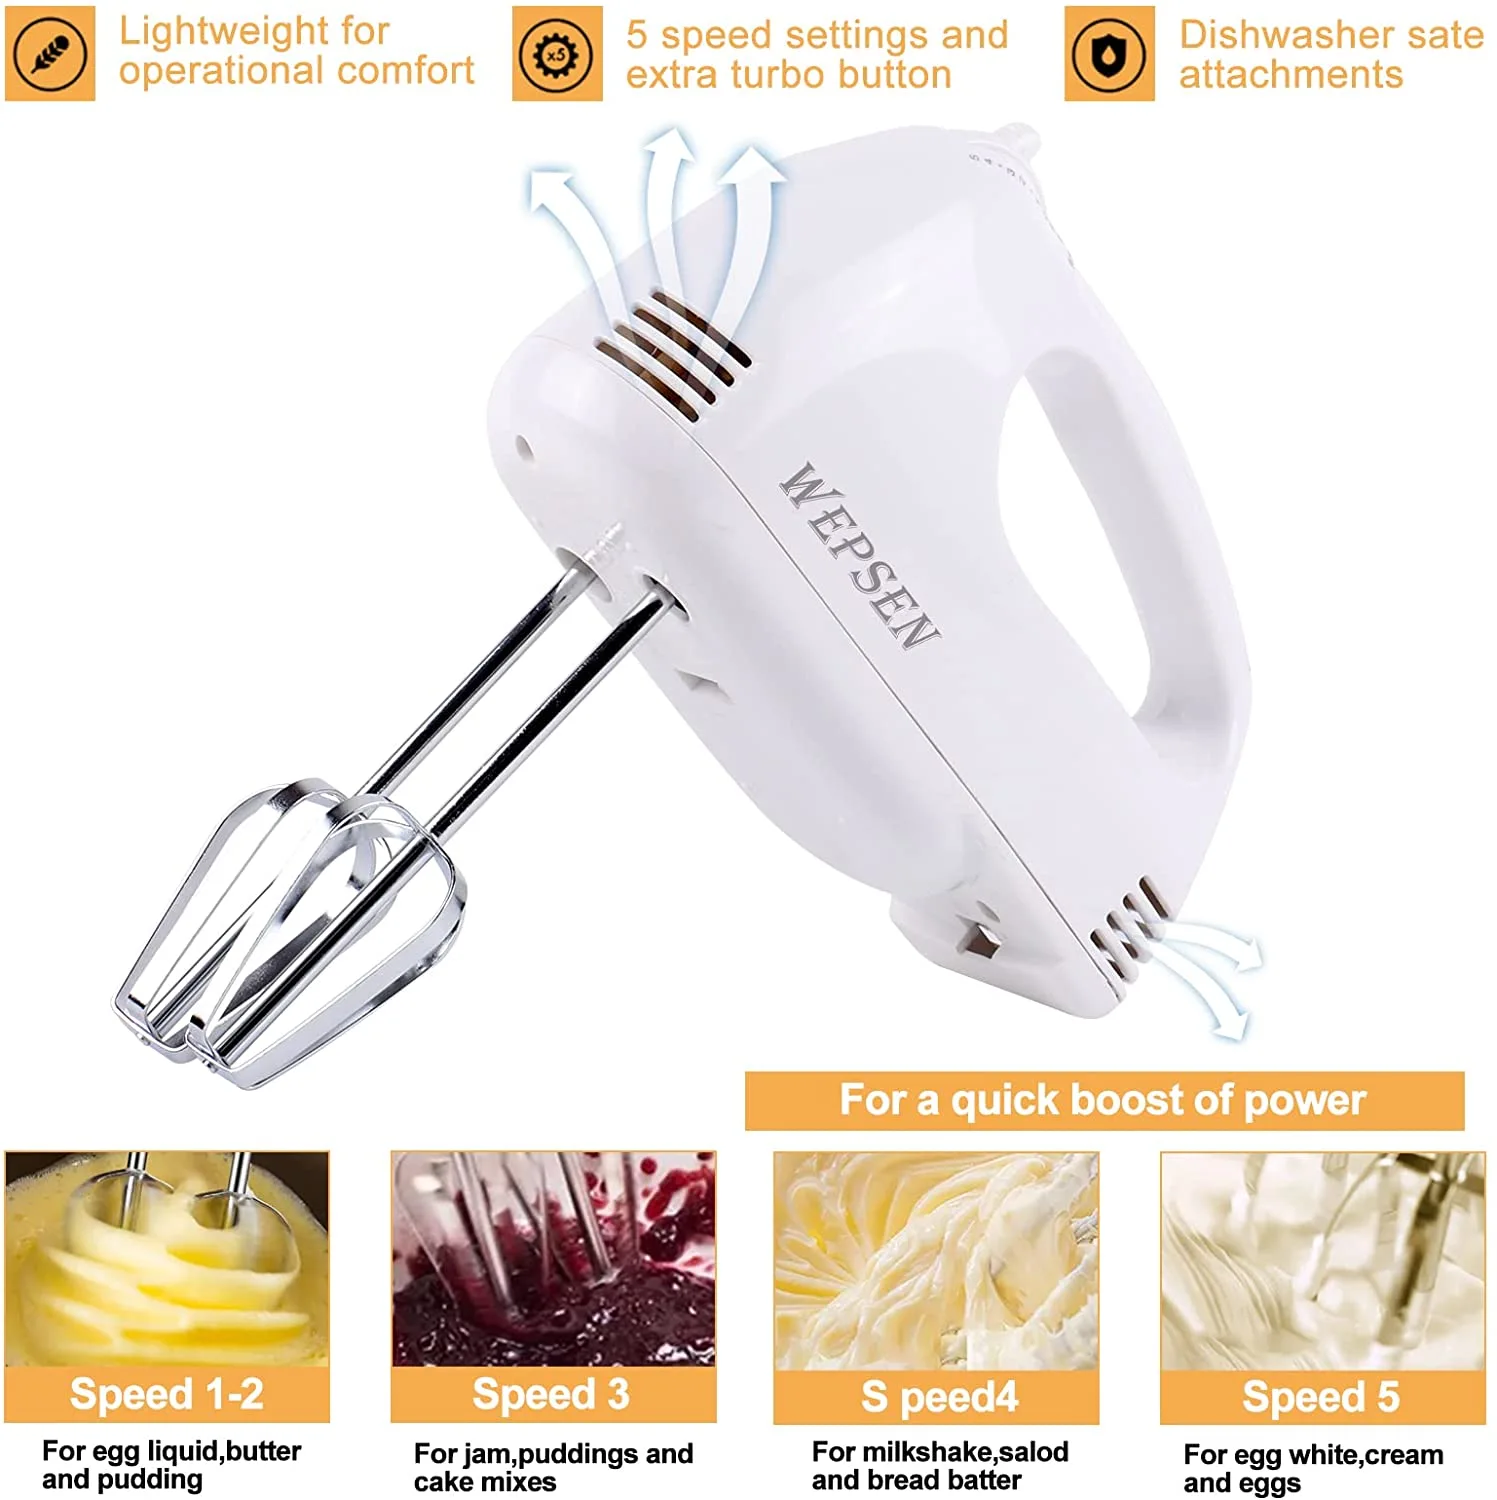 Hand Mixer Mixing Bowls Set, Upgrade 5-Speeds Handheld Mixers with 5 Nesting Stainless Steel Mixing Bowl, Measuring Cups and Spoons Whisk Blender Kitchen Cooking Baking Supplies For Beginner